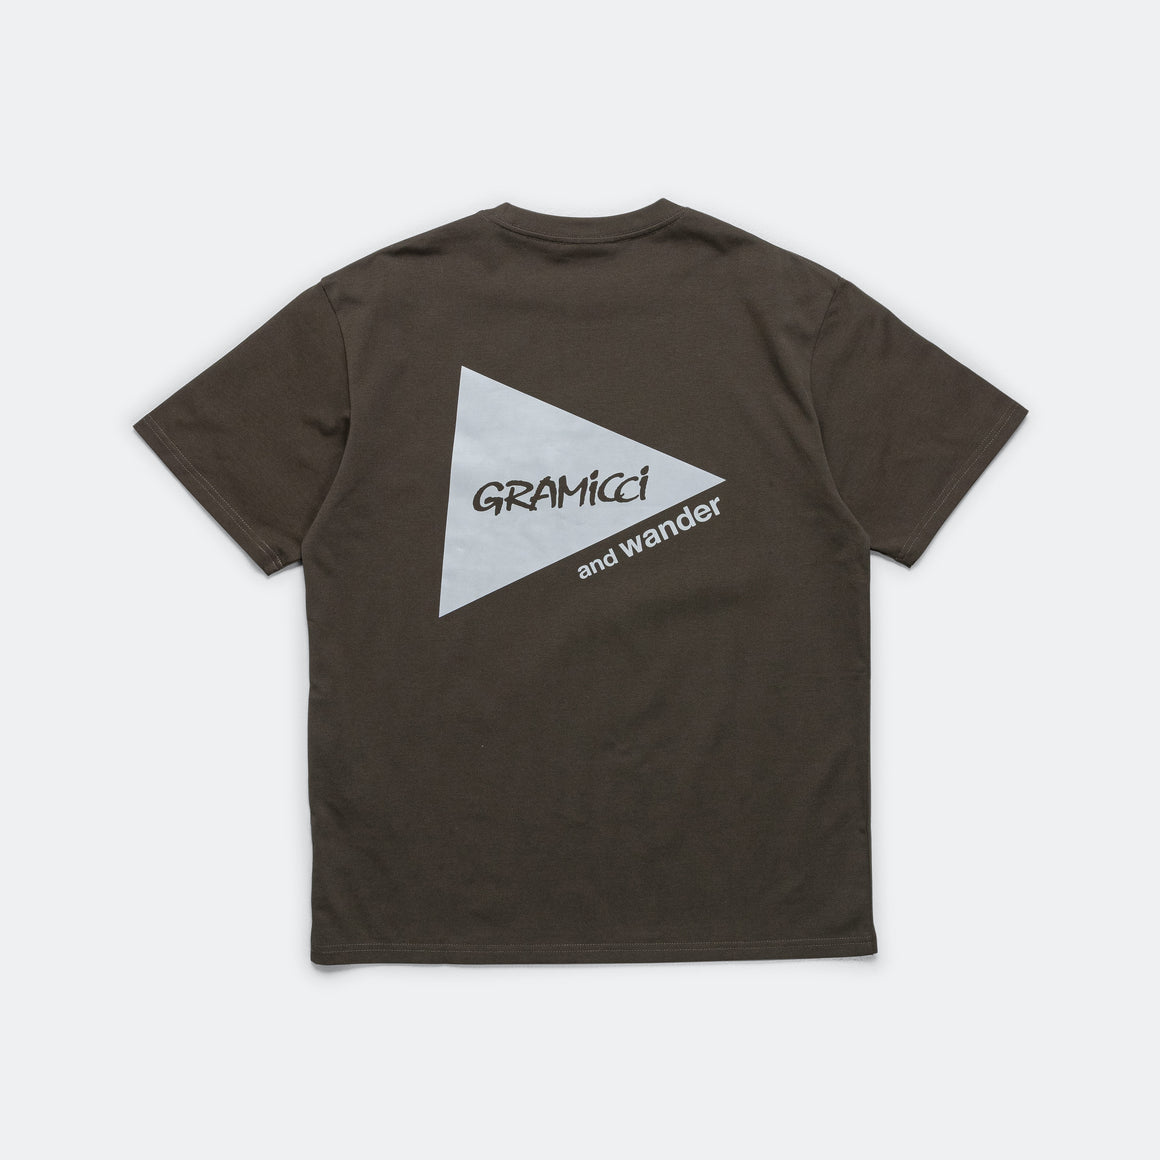 Gramicci - Backprint Tee × and wander - Green - UP THERE